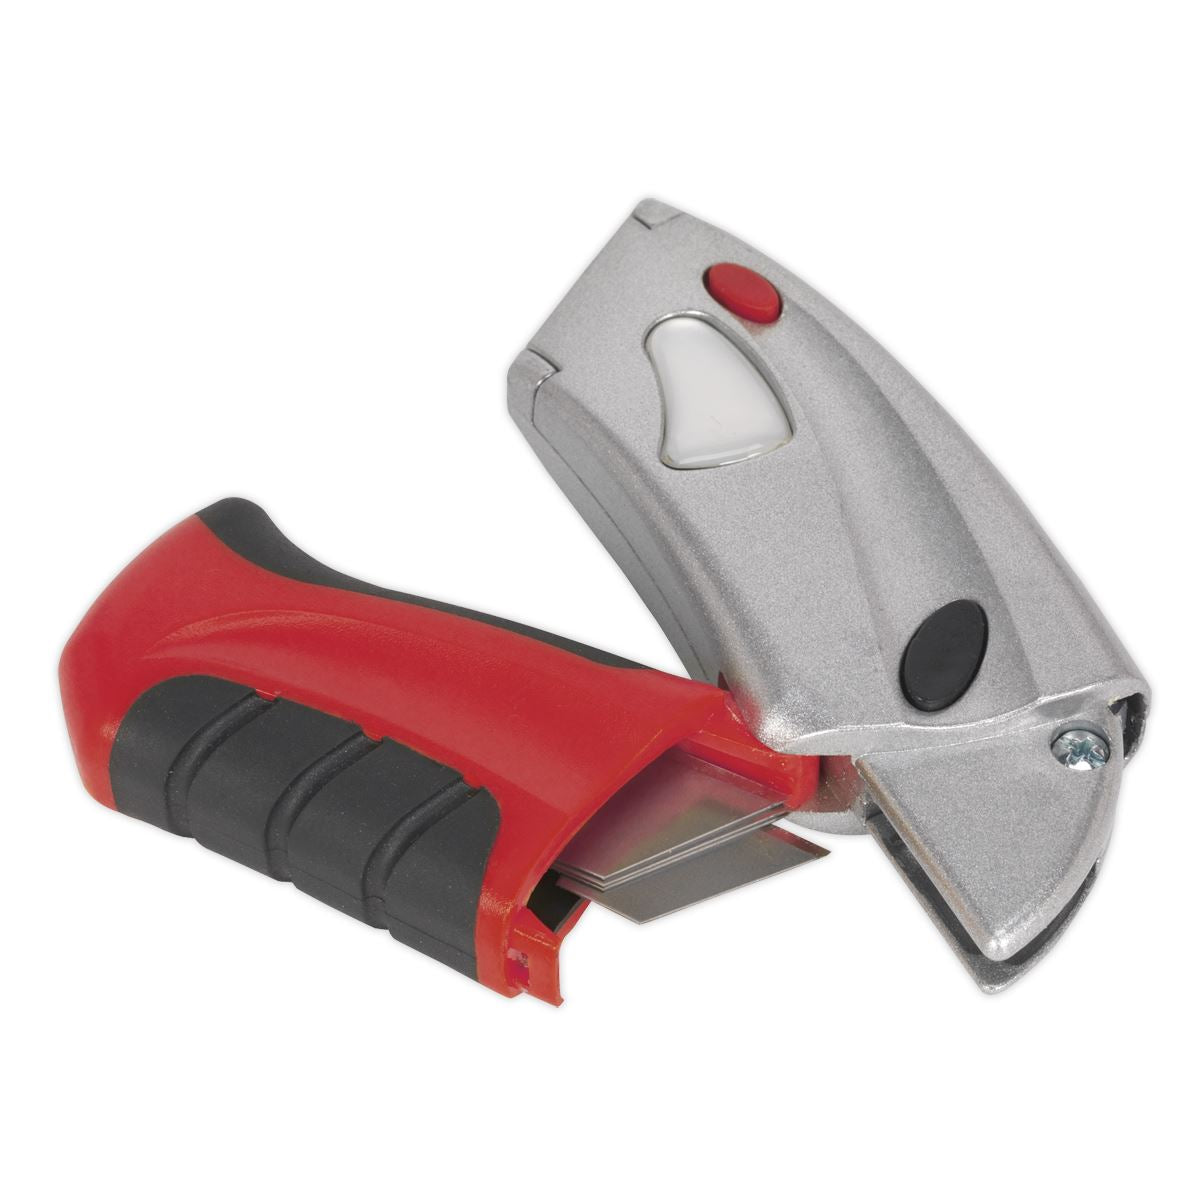 Sealey Premier Retractable Utility Knife Quick Change Blade